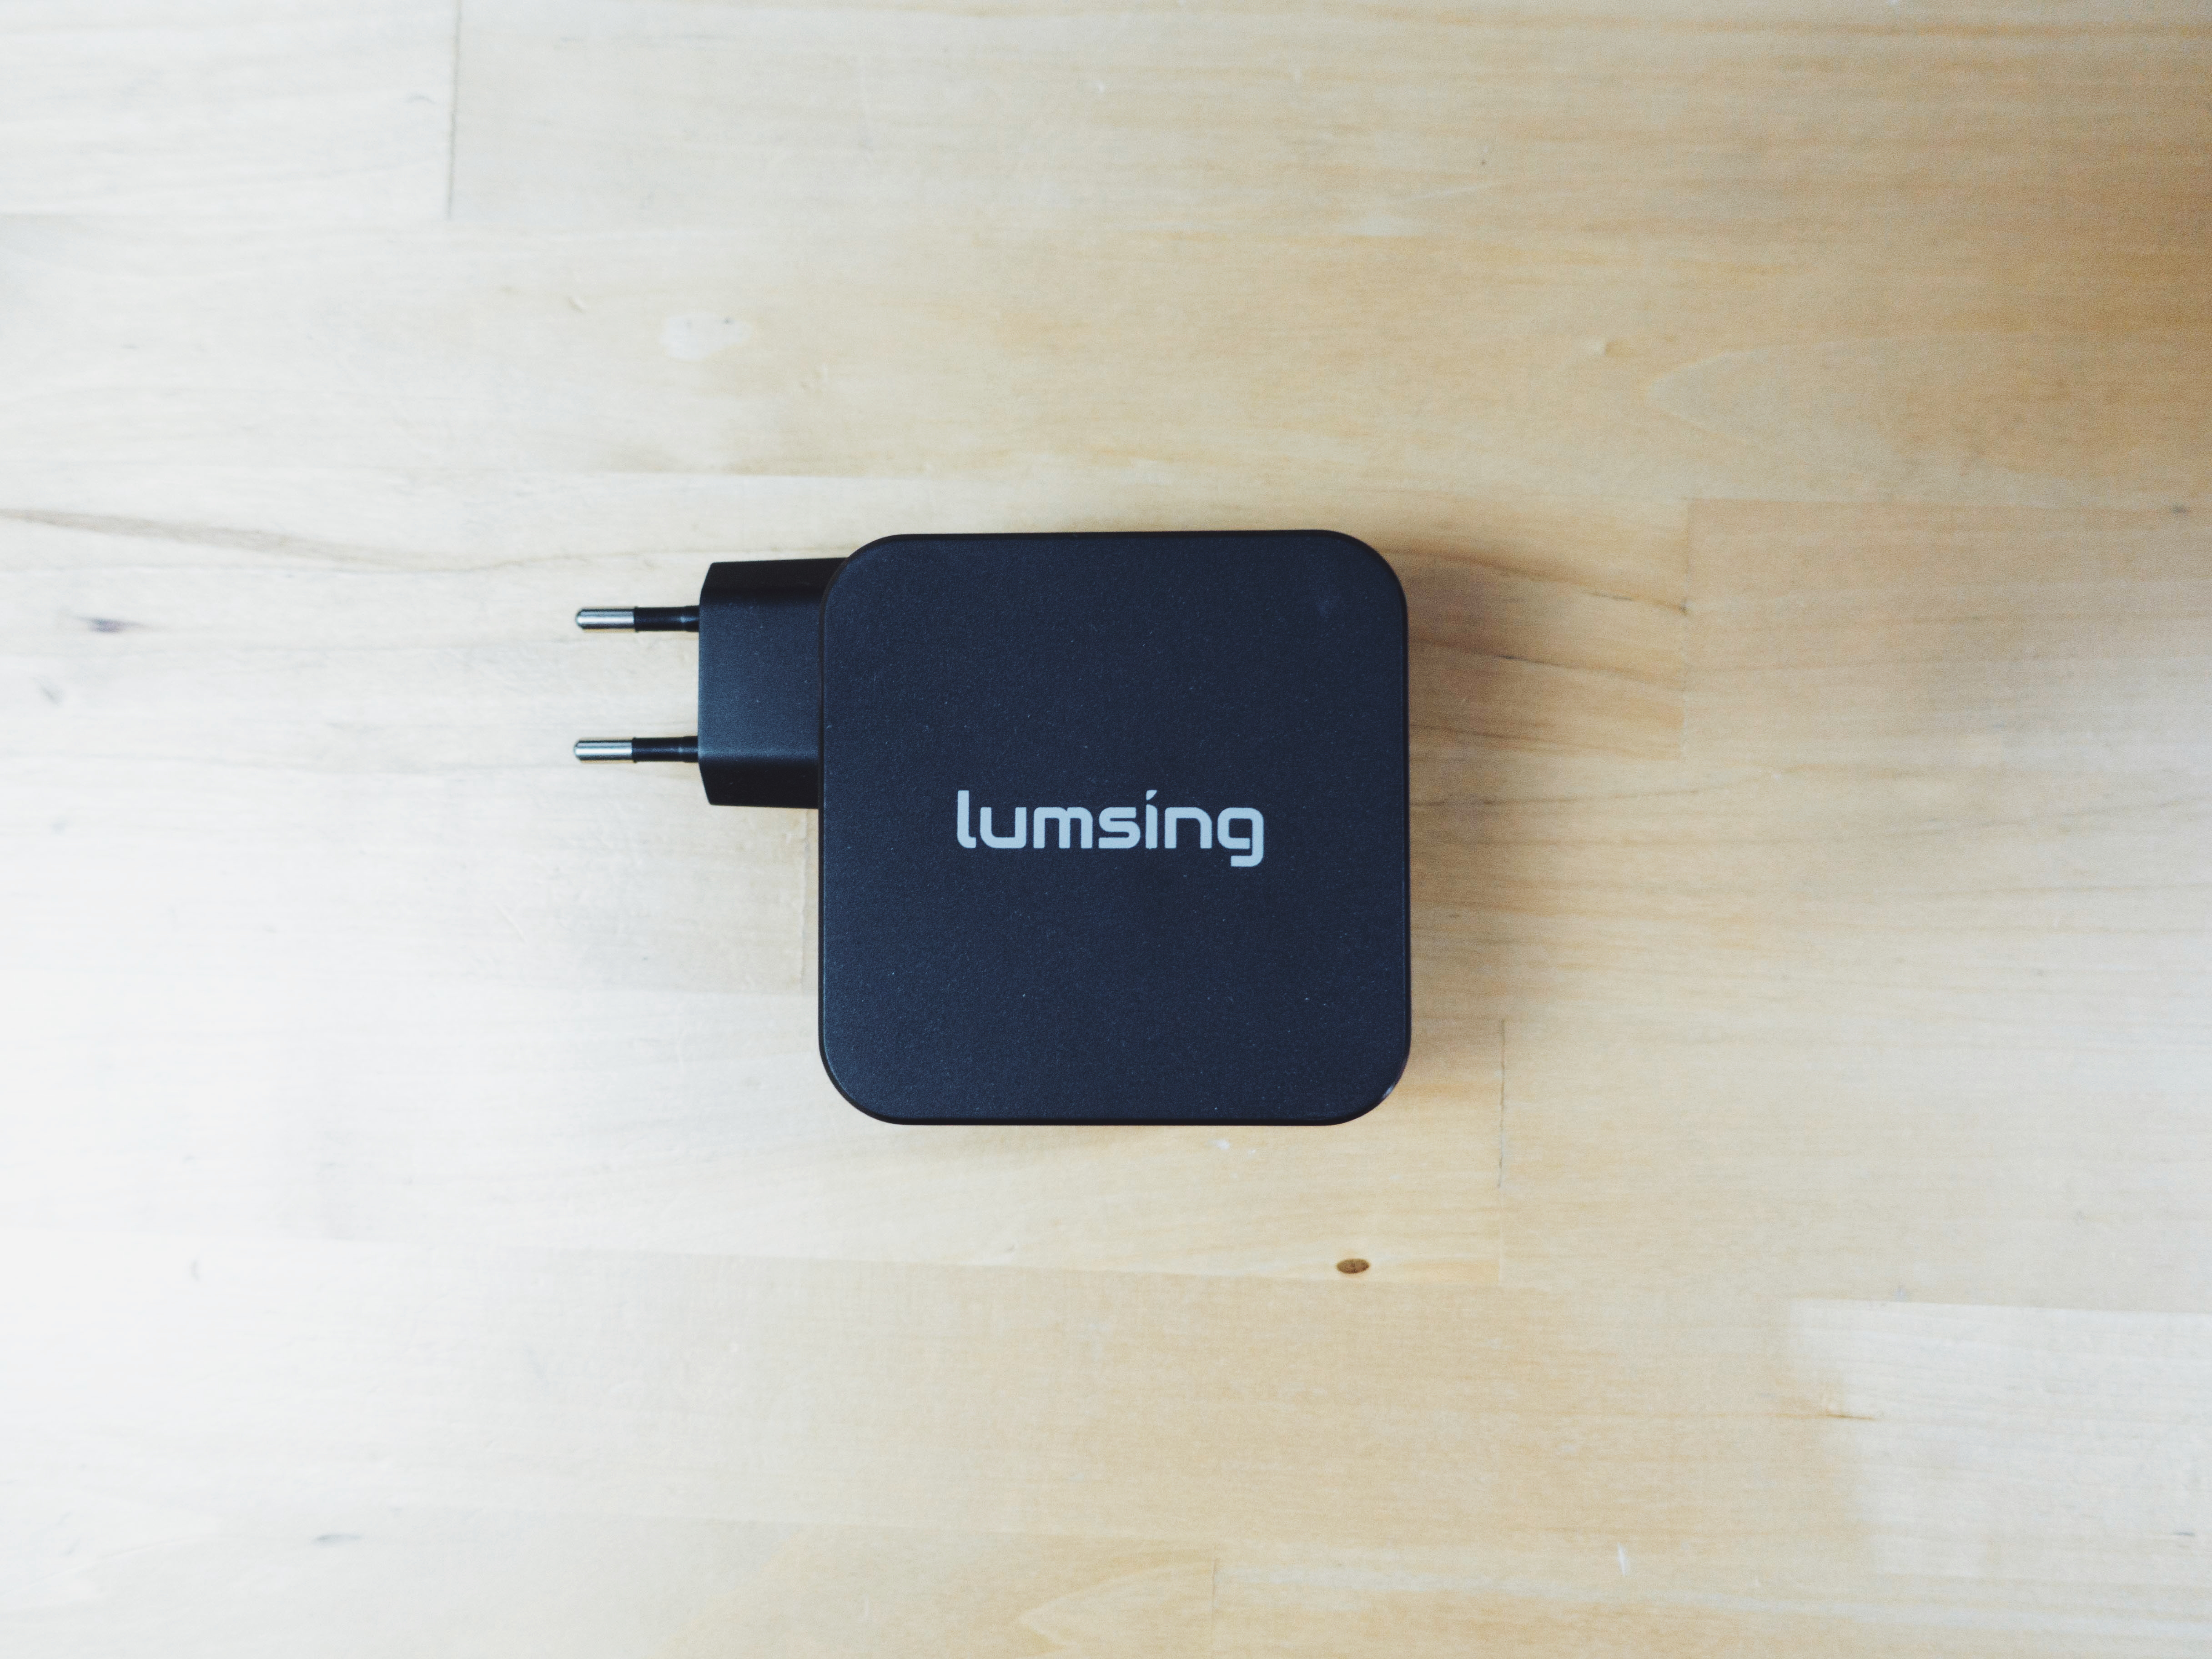 Chargeur Lumsing USB-C & Quick Charge 3.0 : sympa !